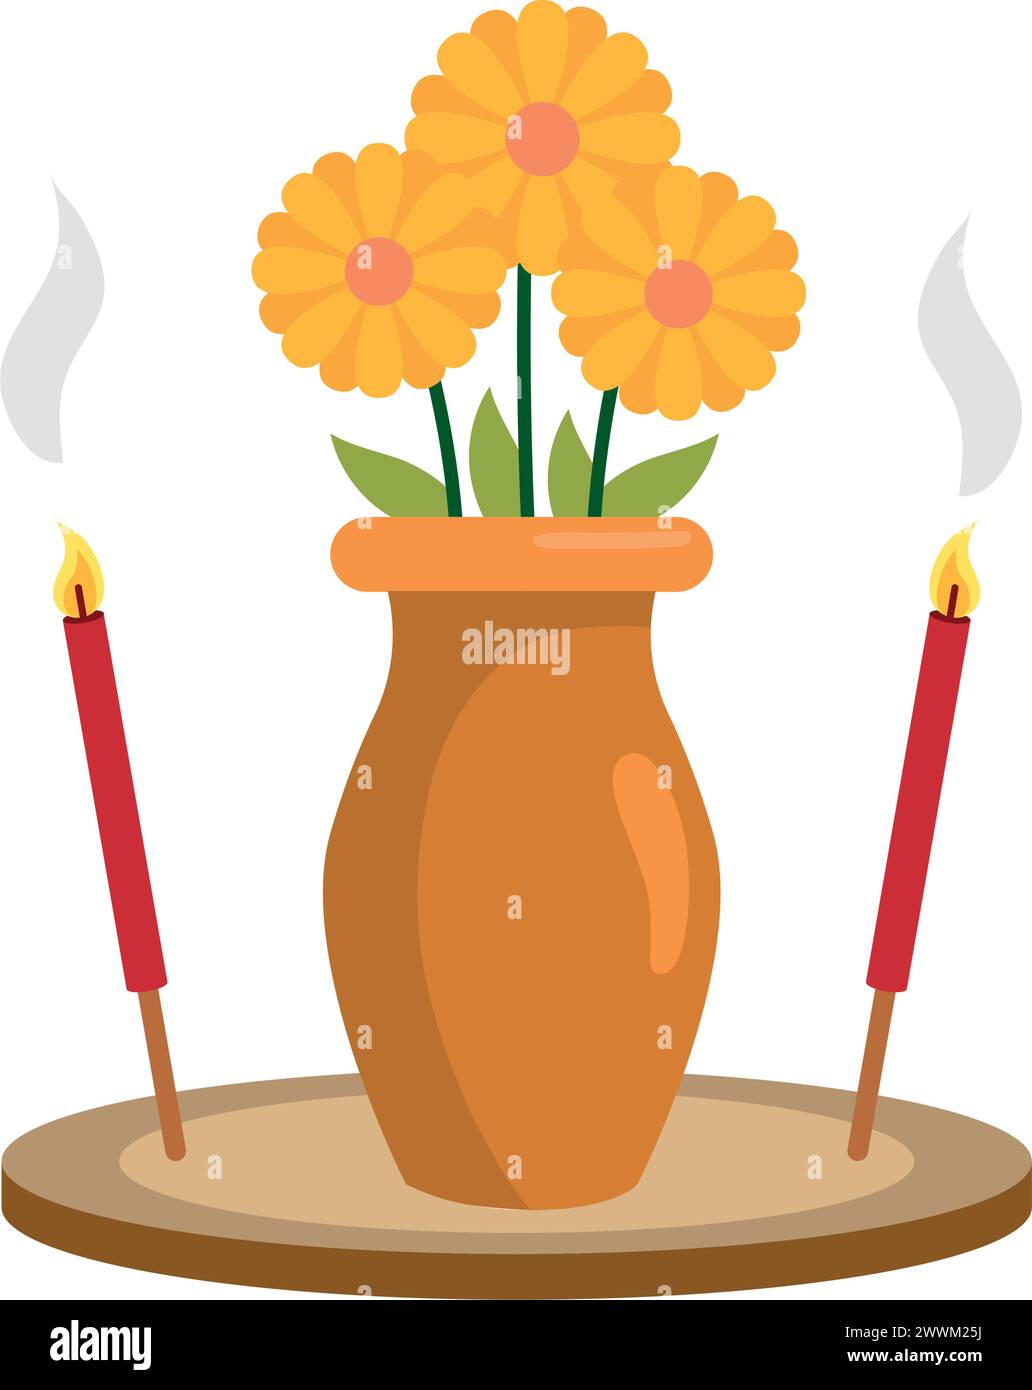 qingming chinese tradition Stock Vector